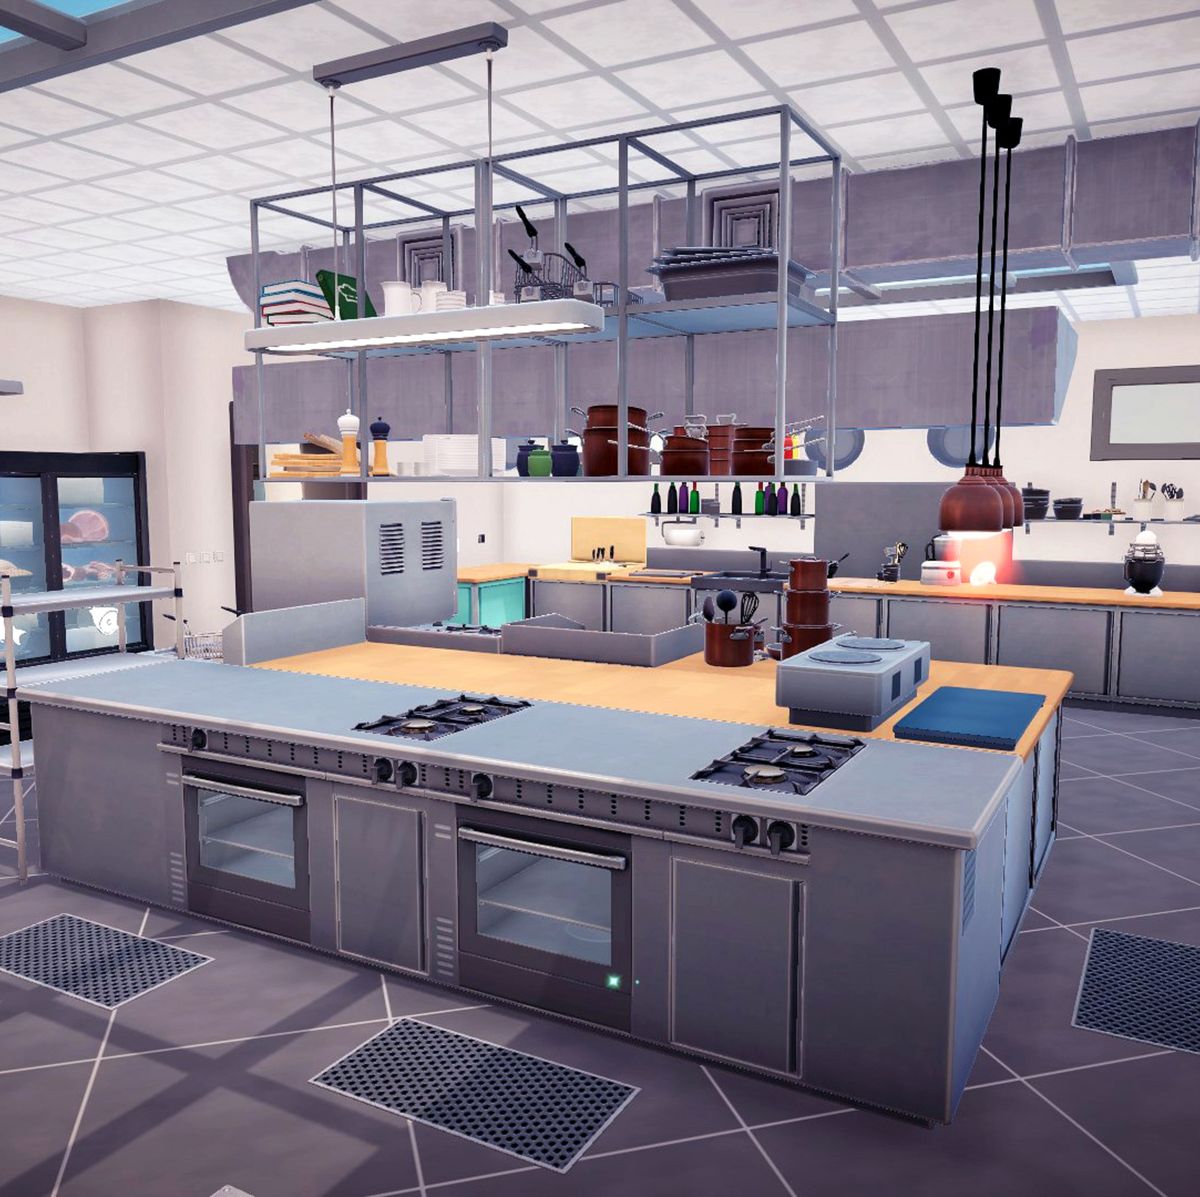 The Sims 4 Design Guide - Modern Kitchen